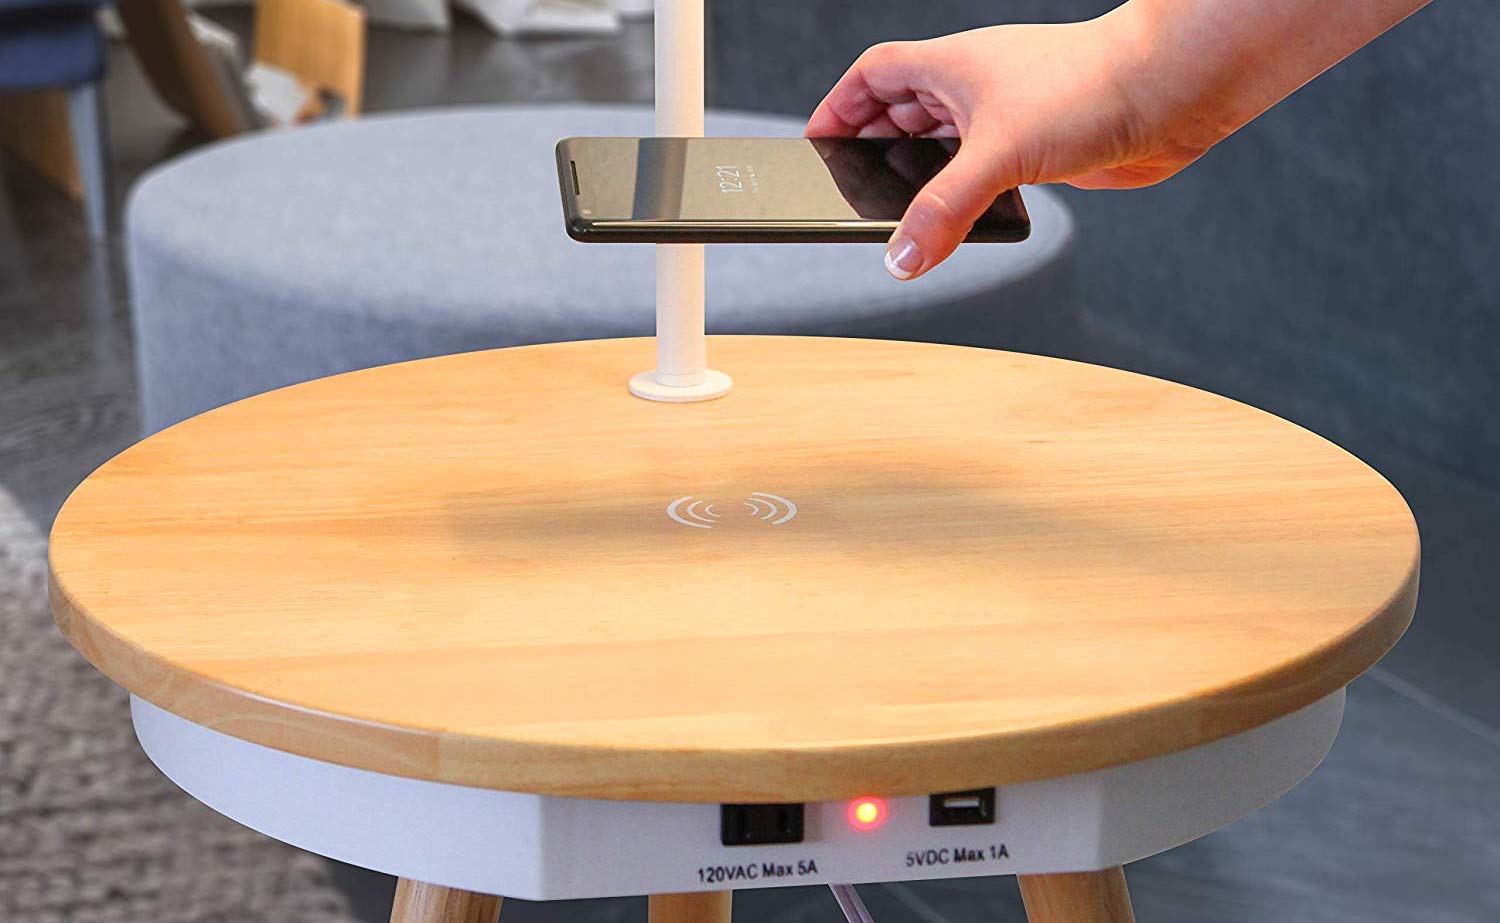 A hand is putting a smartphone on the lamp side table wireless charger.